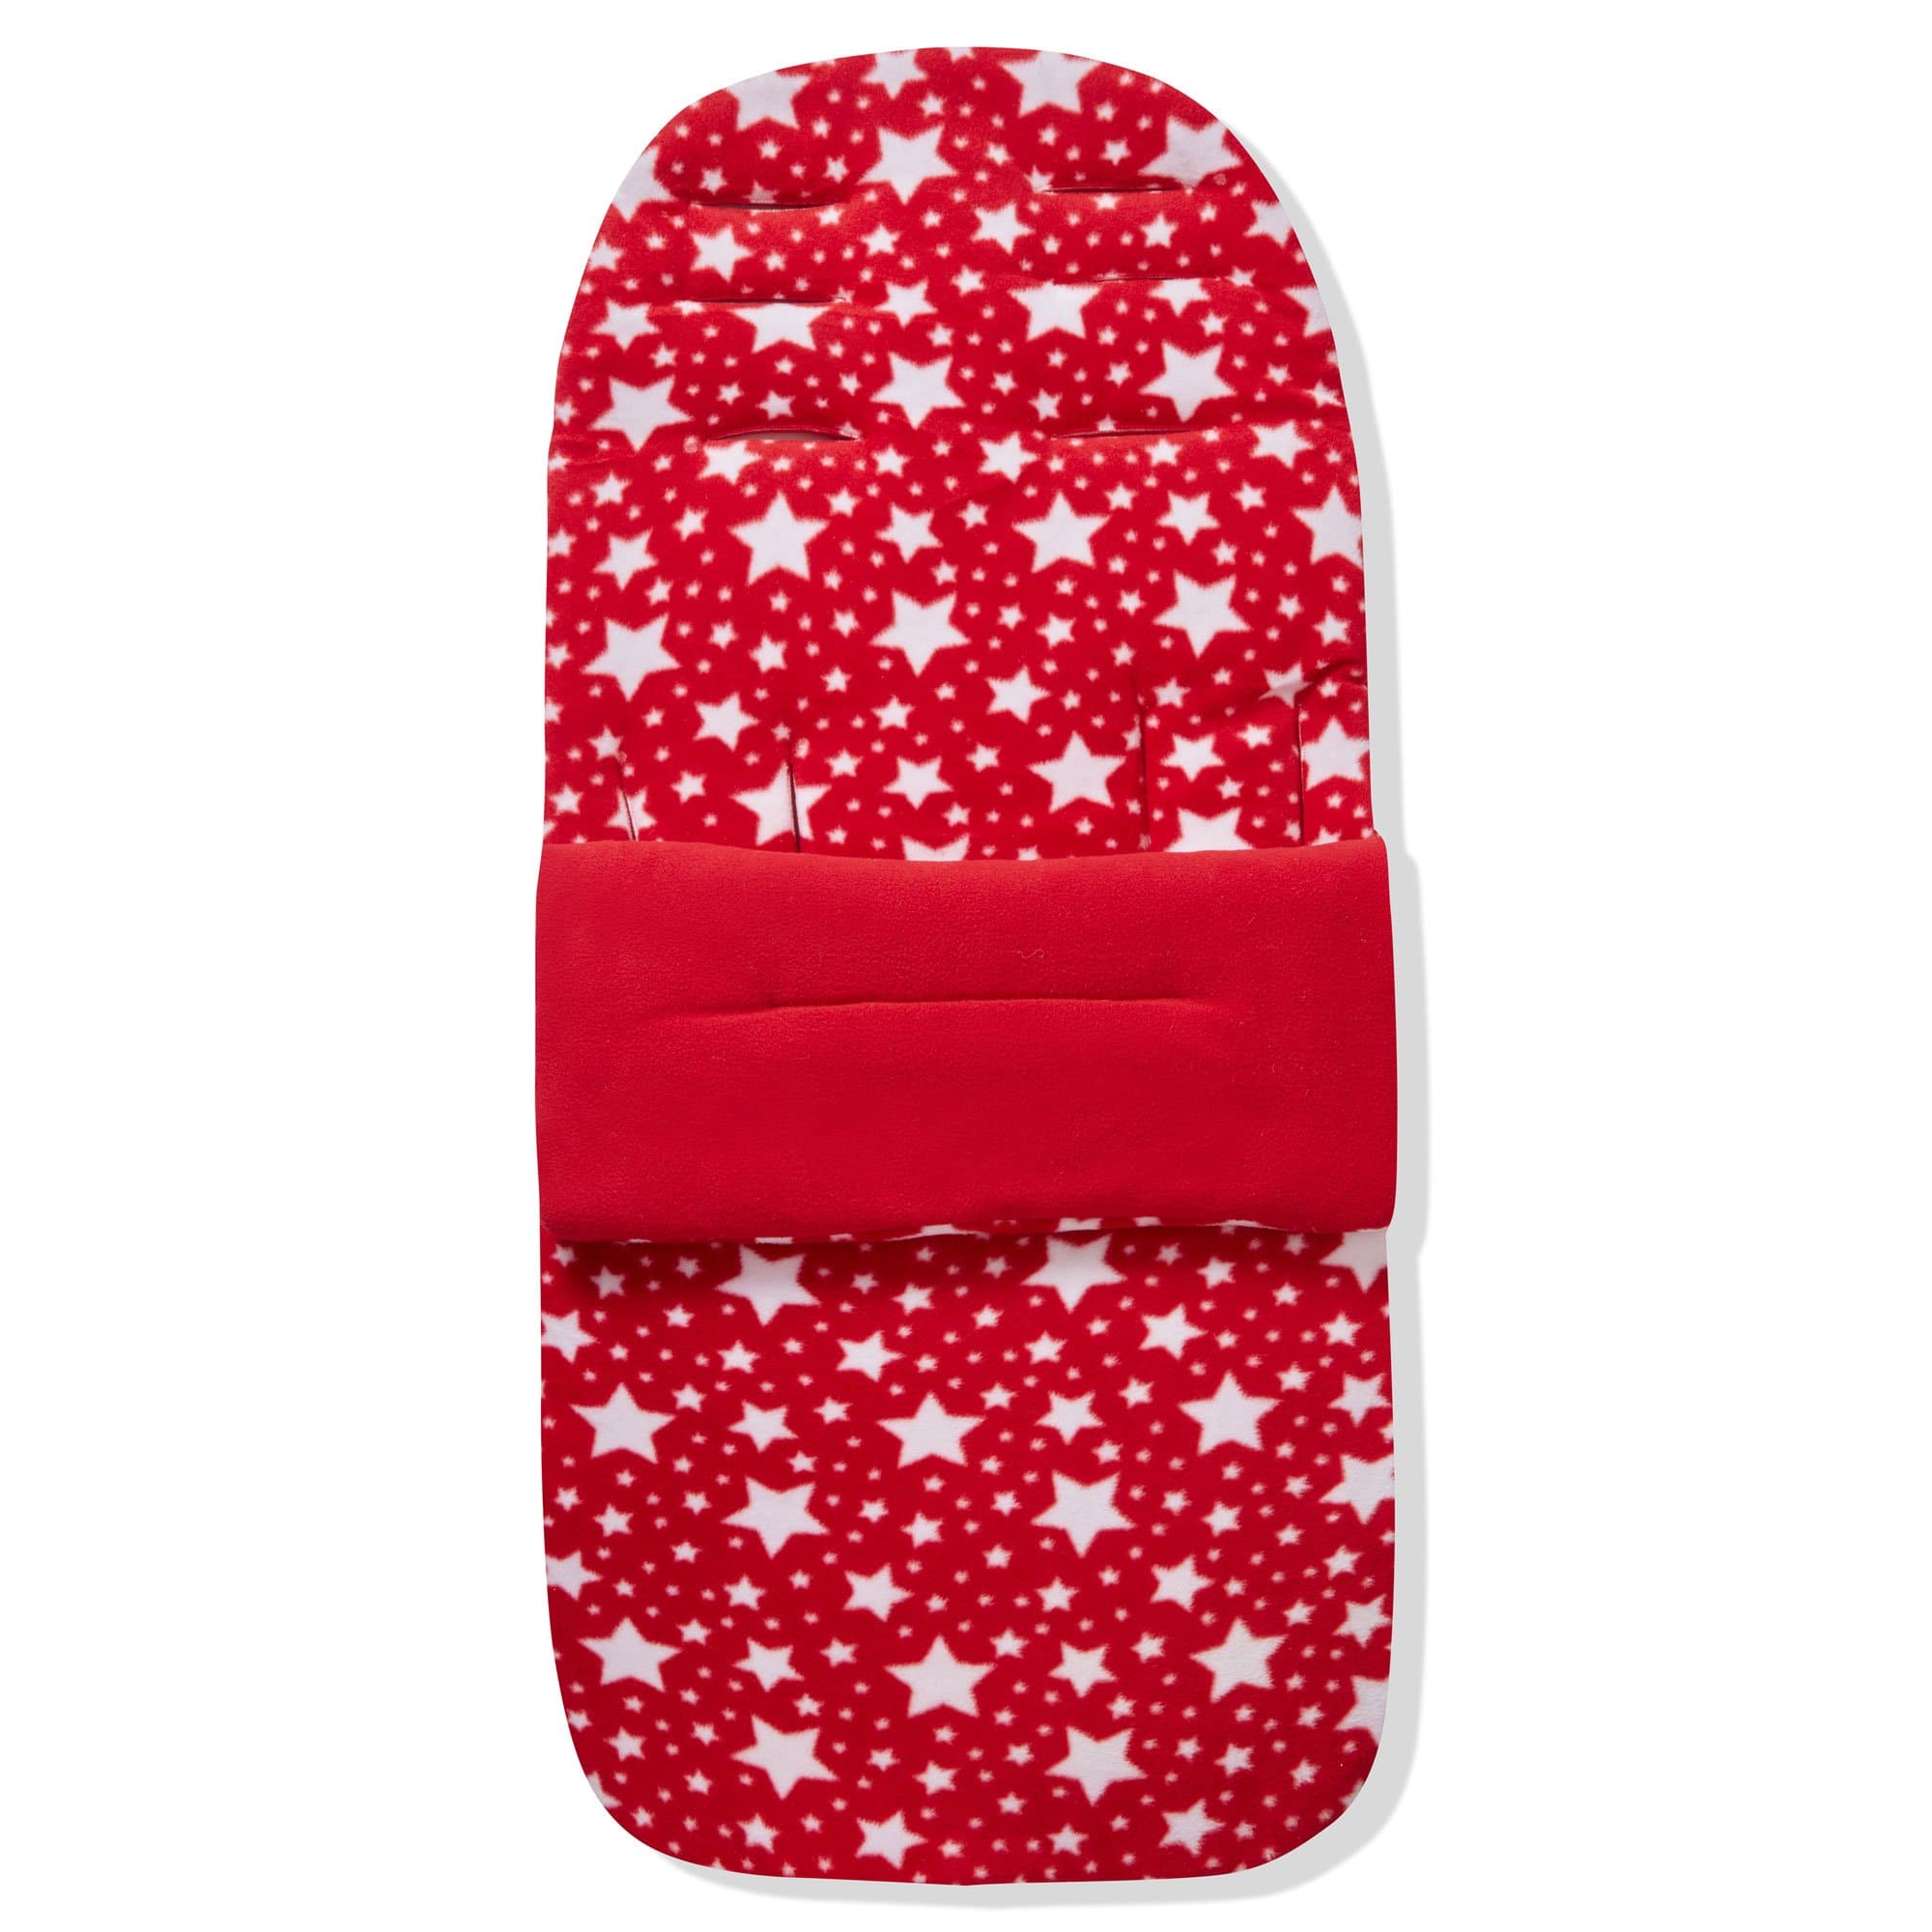 Fleece Footmuff / Cosy Toes Compatible with Inglesina - Red Star / Fits All Models | For Your Little One